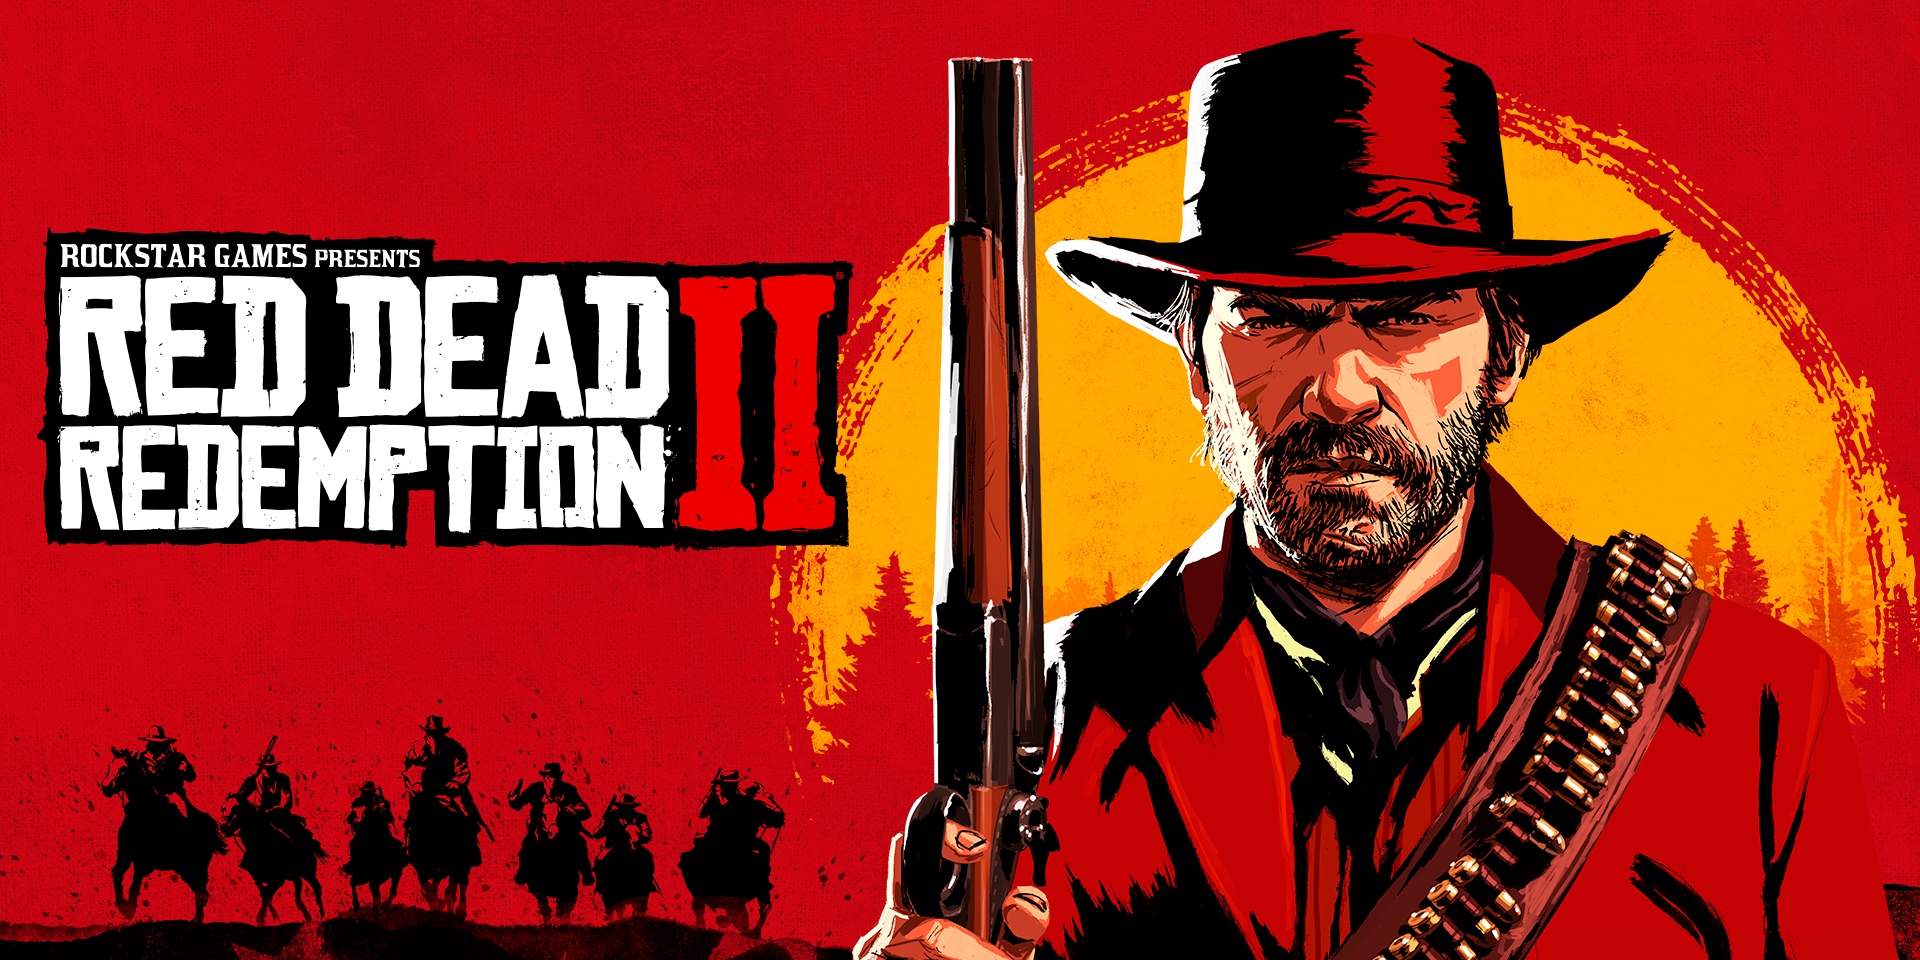 Beskrive operation Sanselig Today's Best Game Deals: Red Dead Redemption 2 Special $36, PAC-MAN $2, more